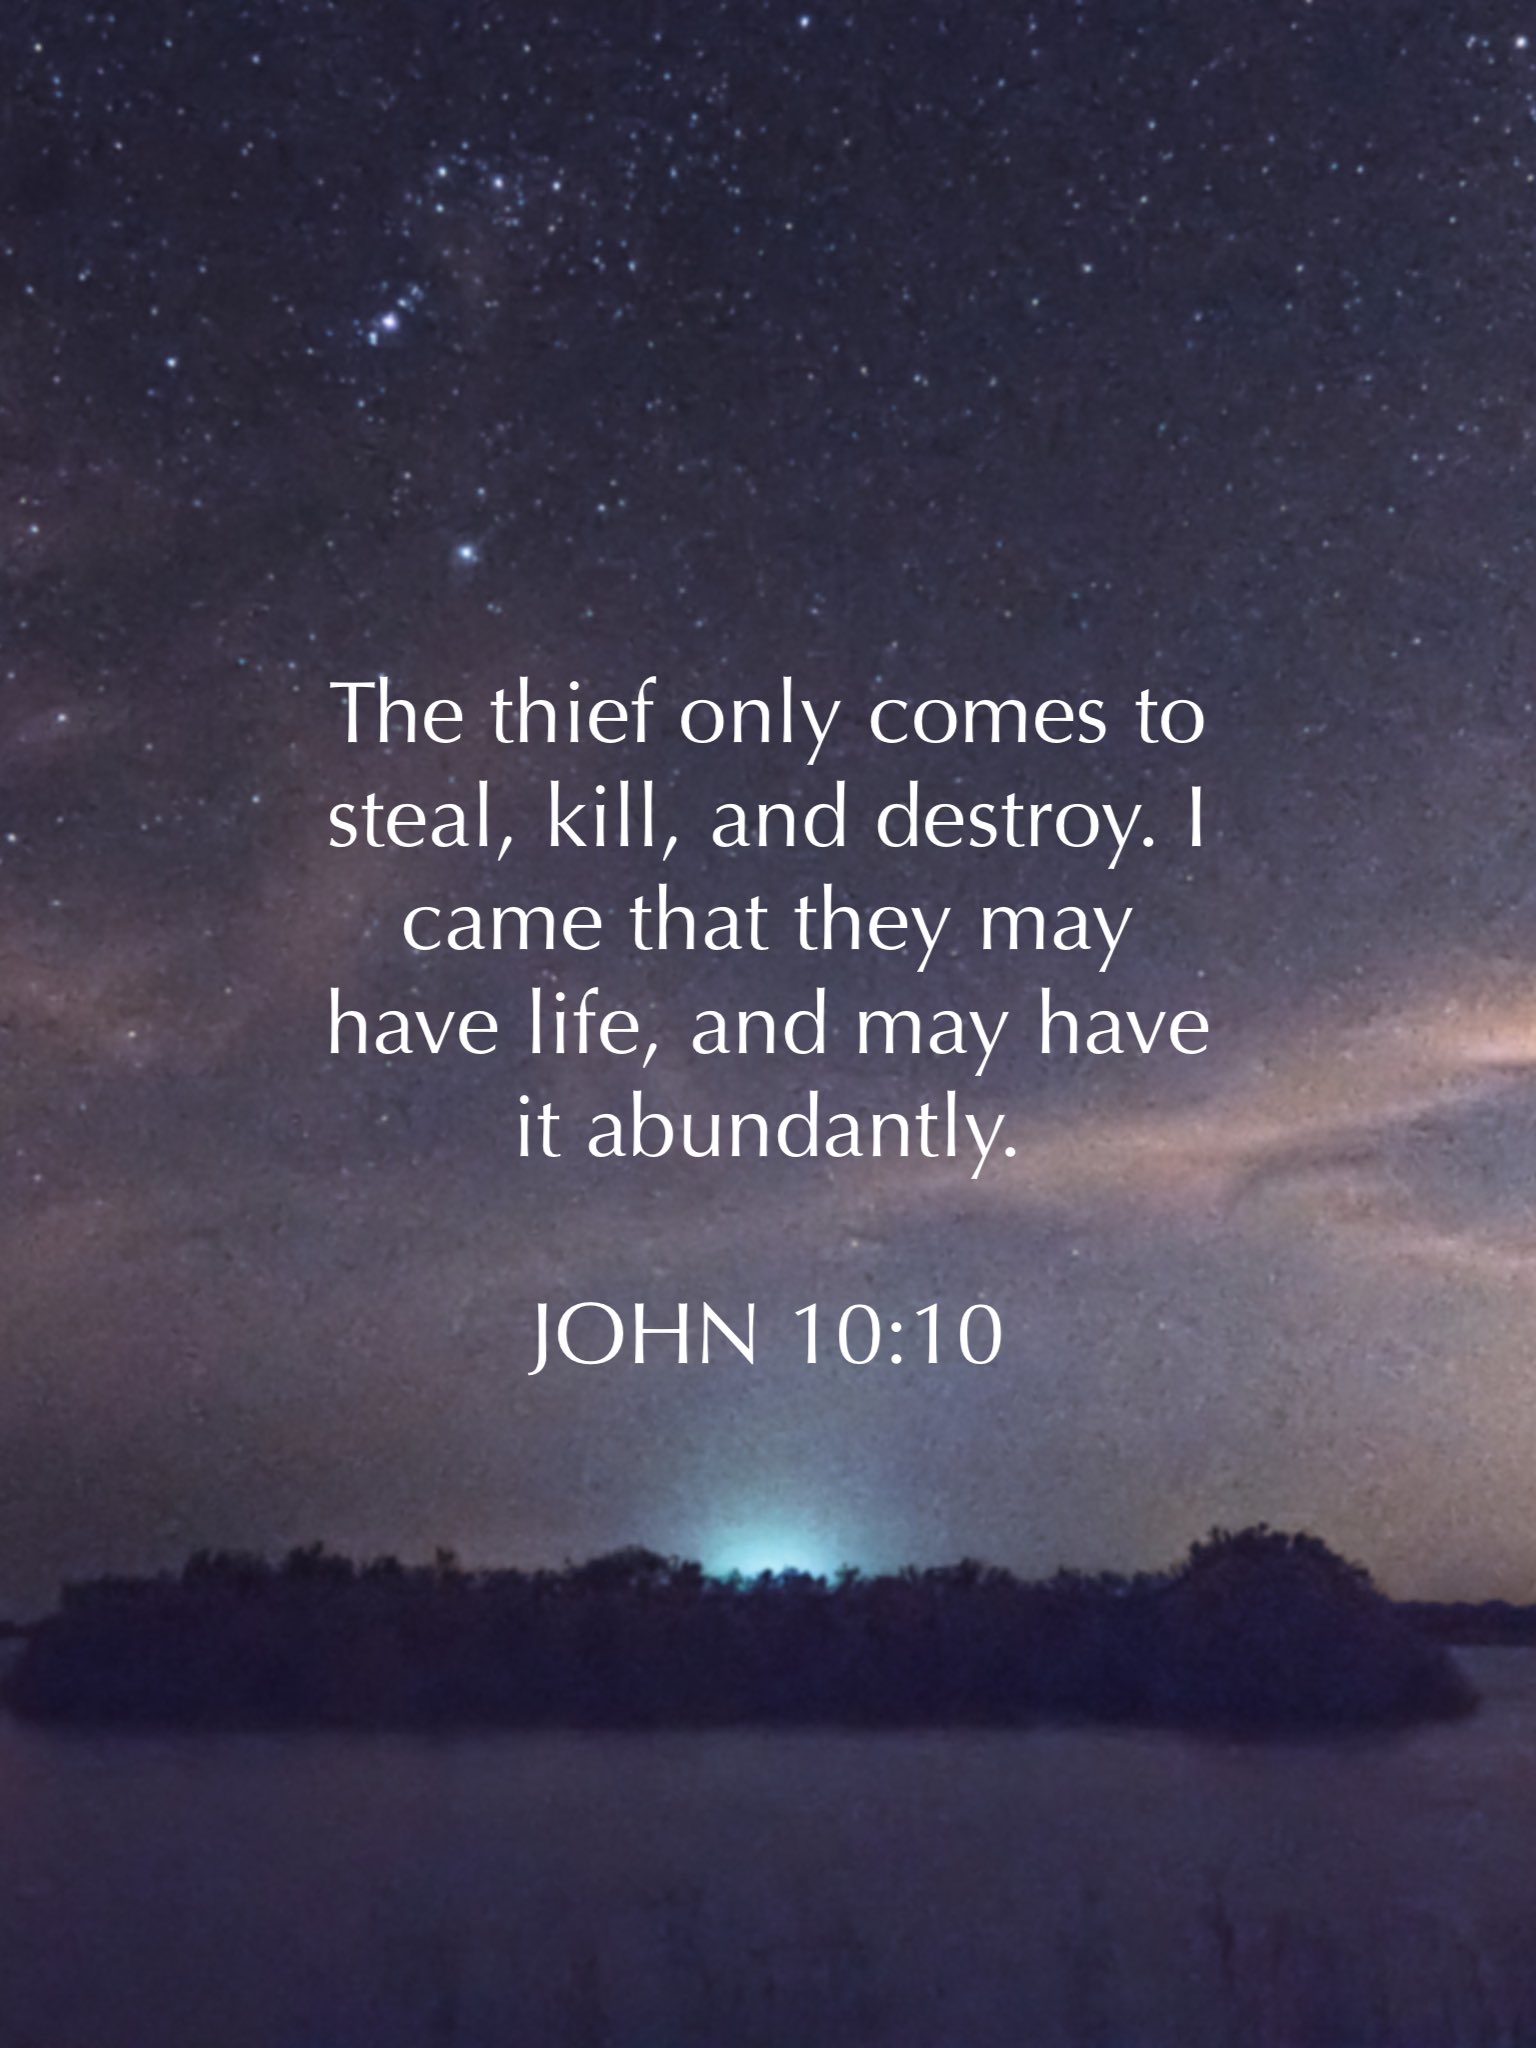 The thief only comes to steal, kill, and destroy: came that may have life, and may have it abundantly: JOHN 10:10 they